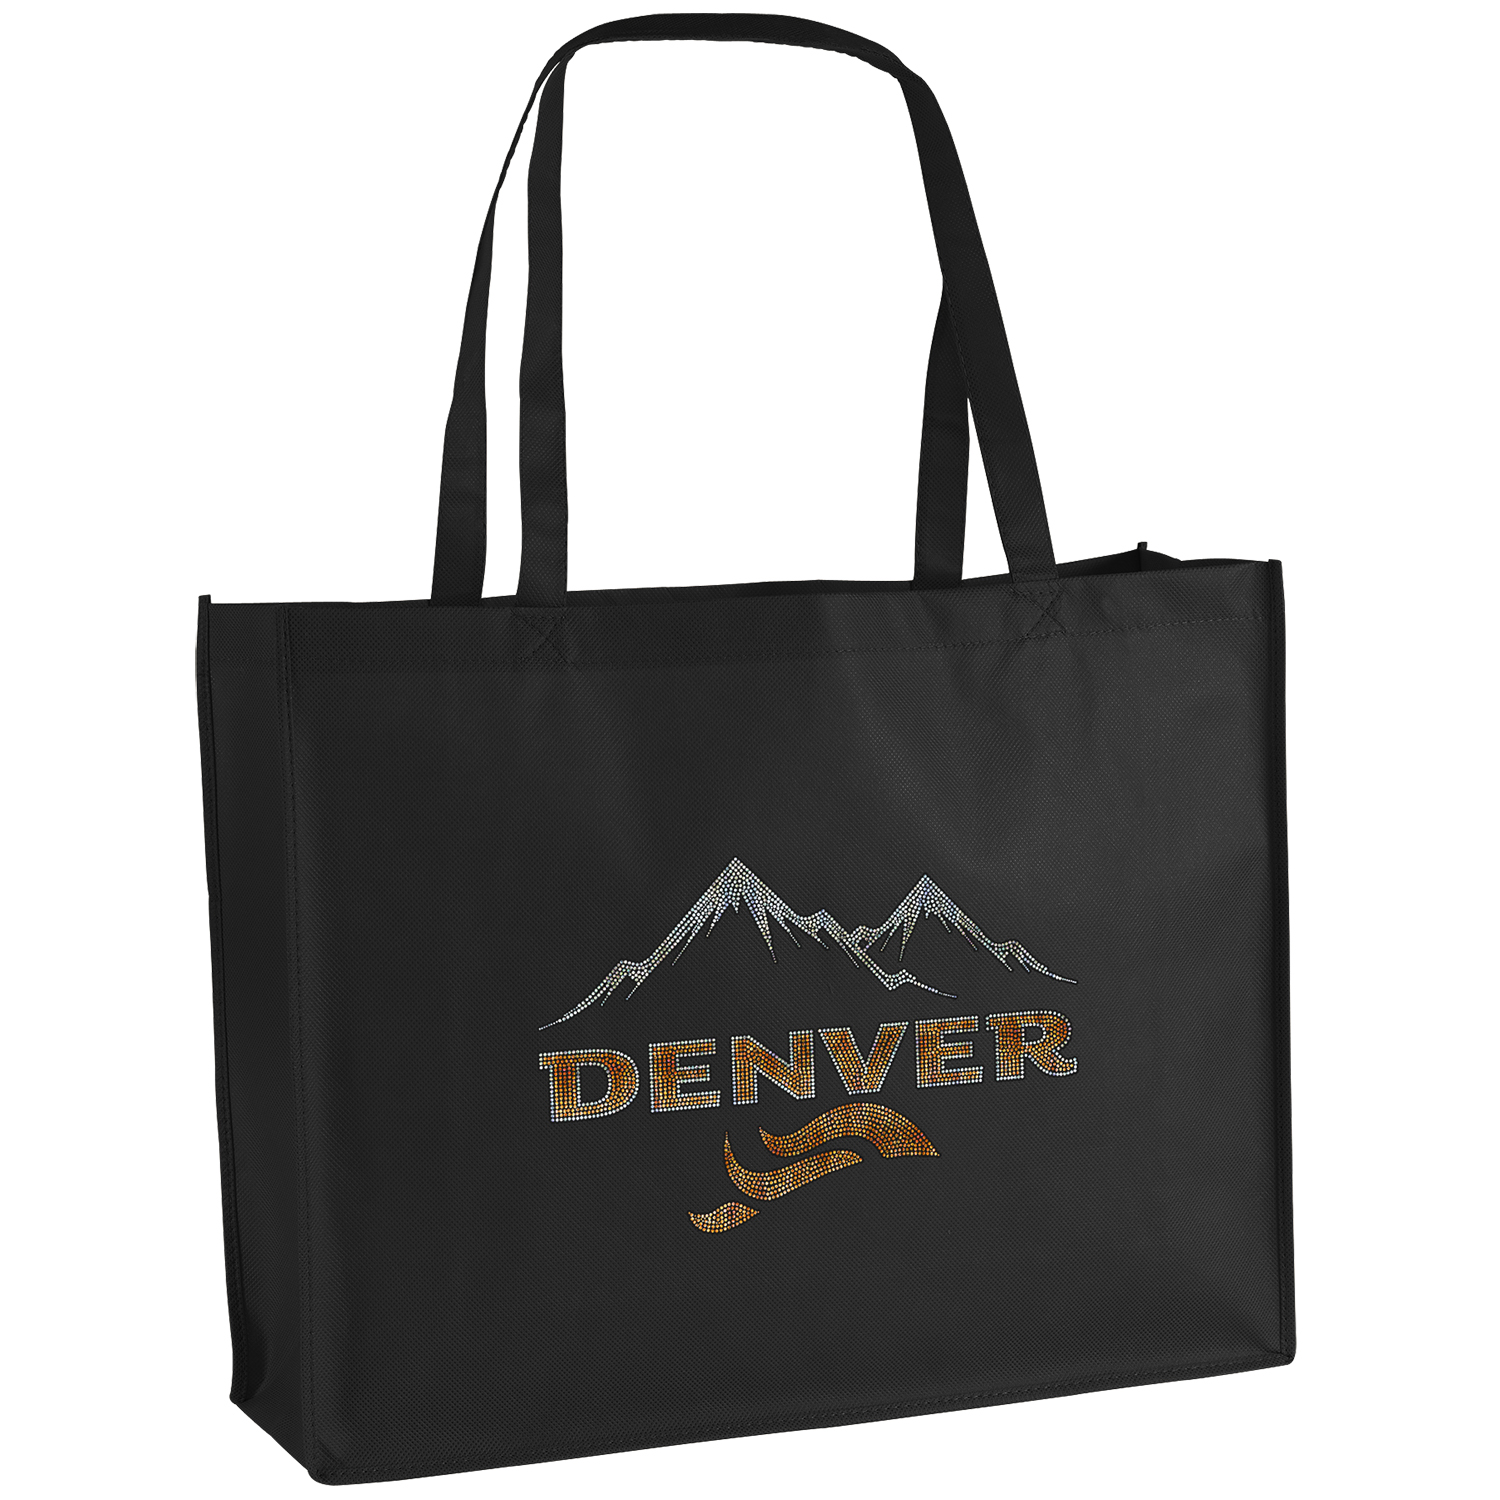 Bag Makers SPPL2016 - Custom Printed Eco-Friendly Promotional Non-Woven Grocery Tote Bag